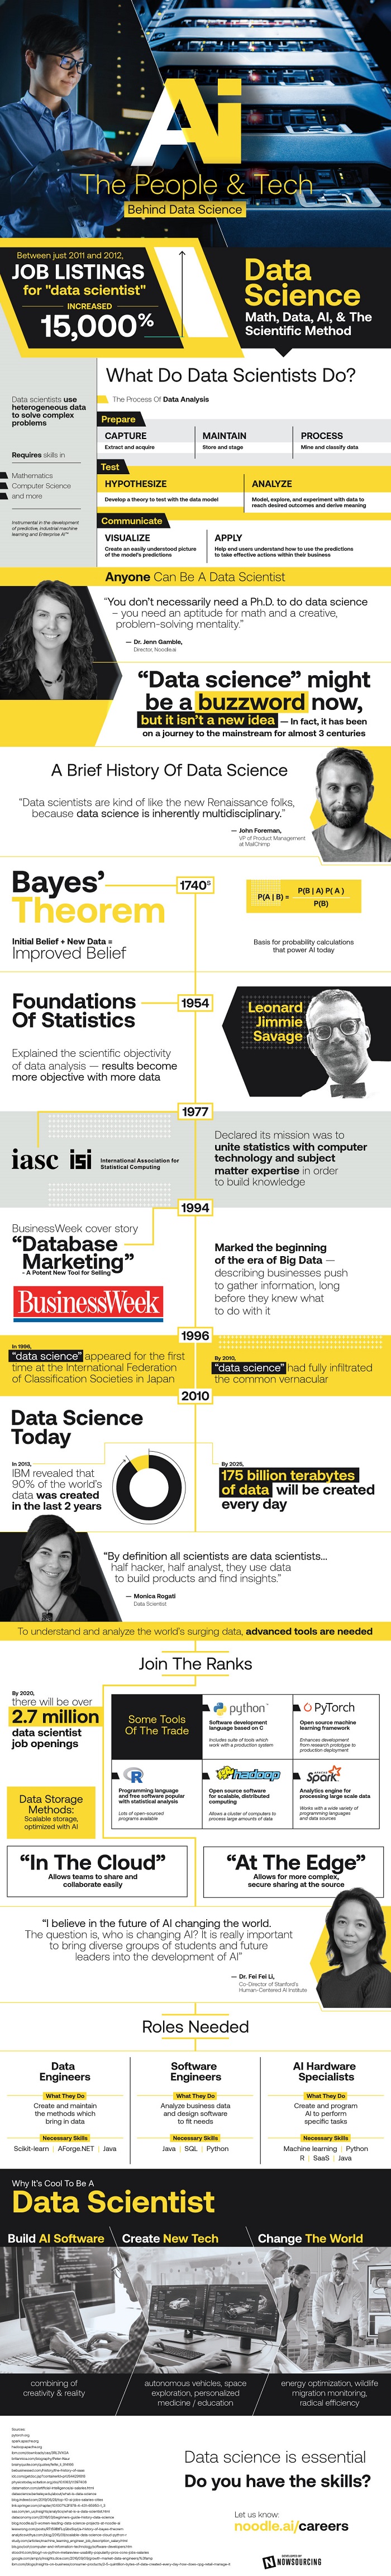 Infographic: The People and Tech Behind Data Science - insideBIGDATA